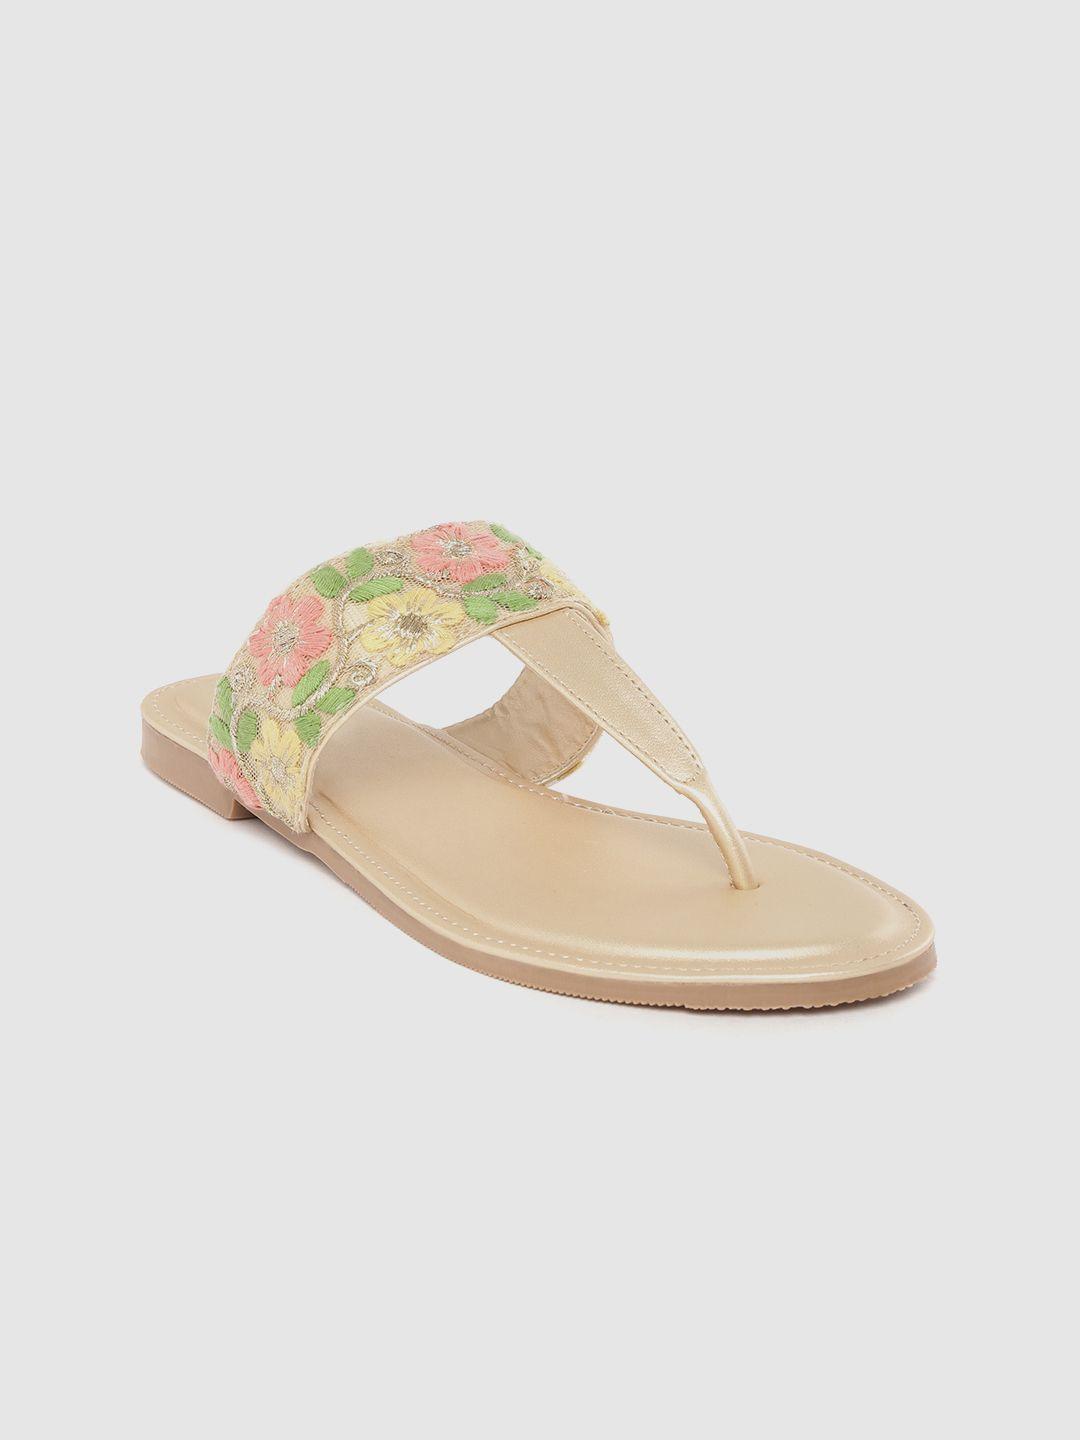 marc-loire-women-pink-&-green-floral-embroidered-t-strap-flats